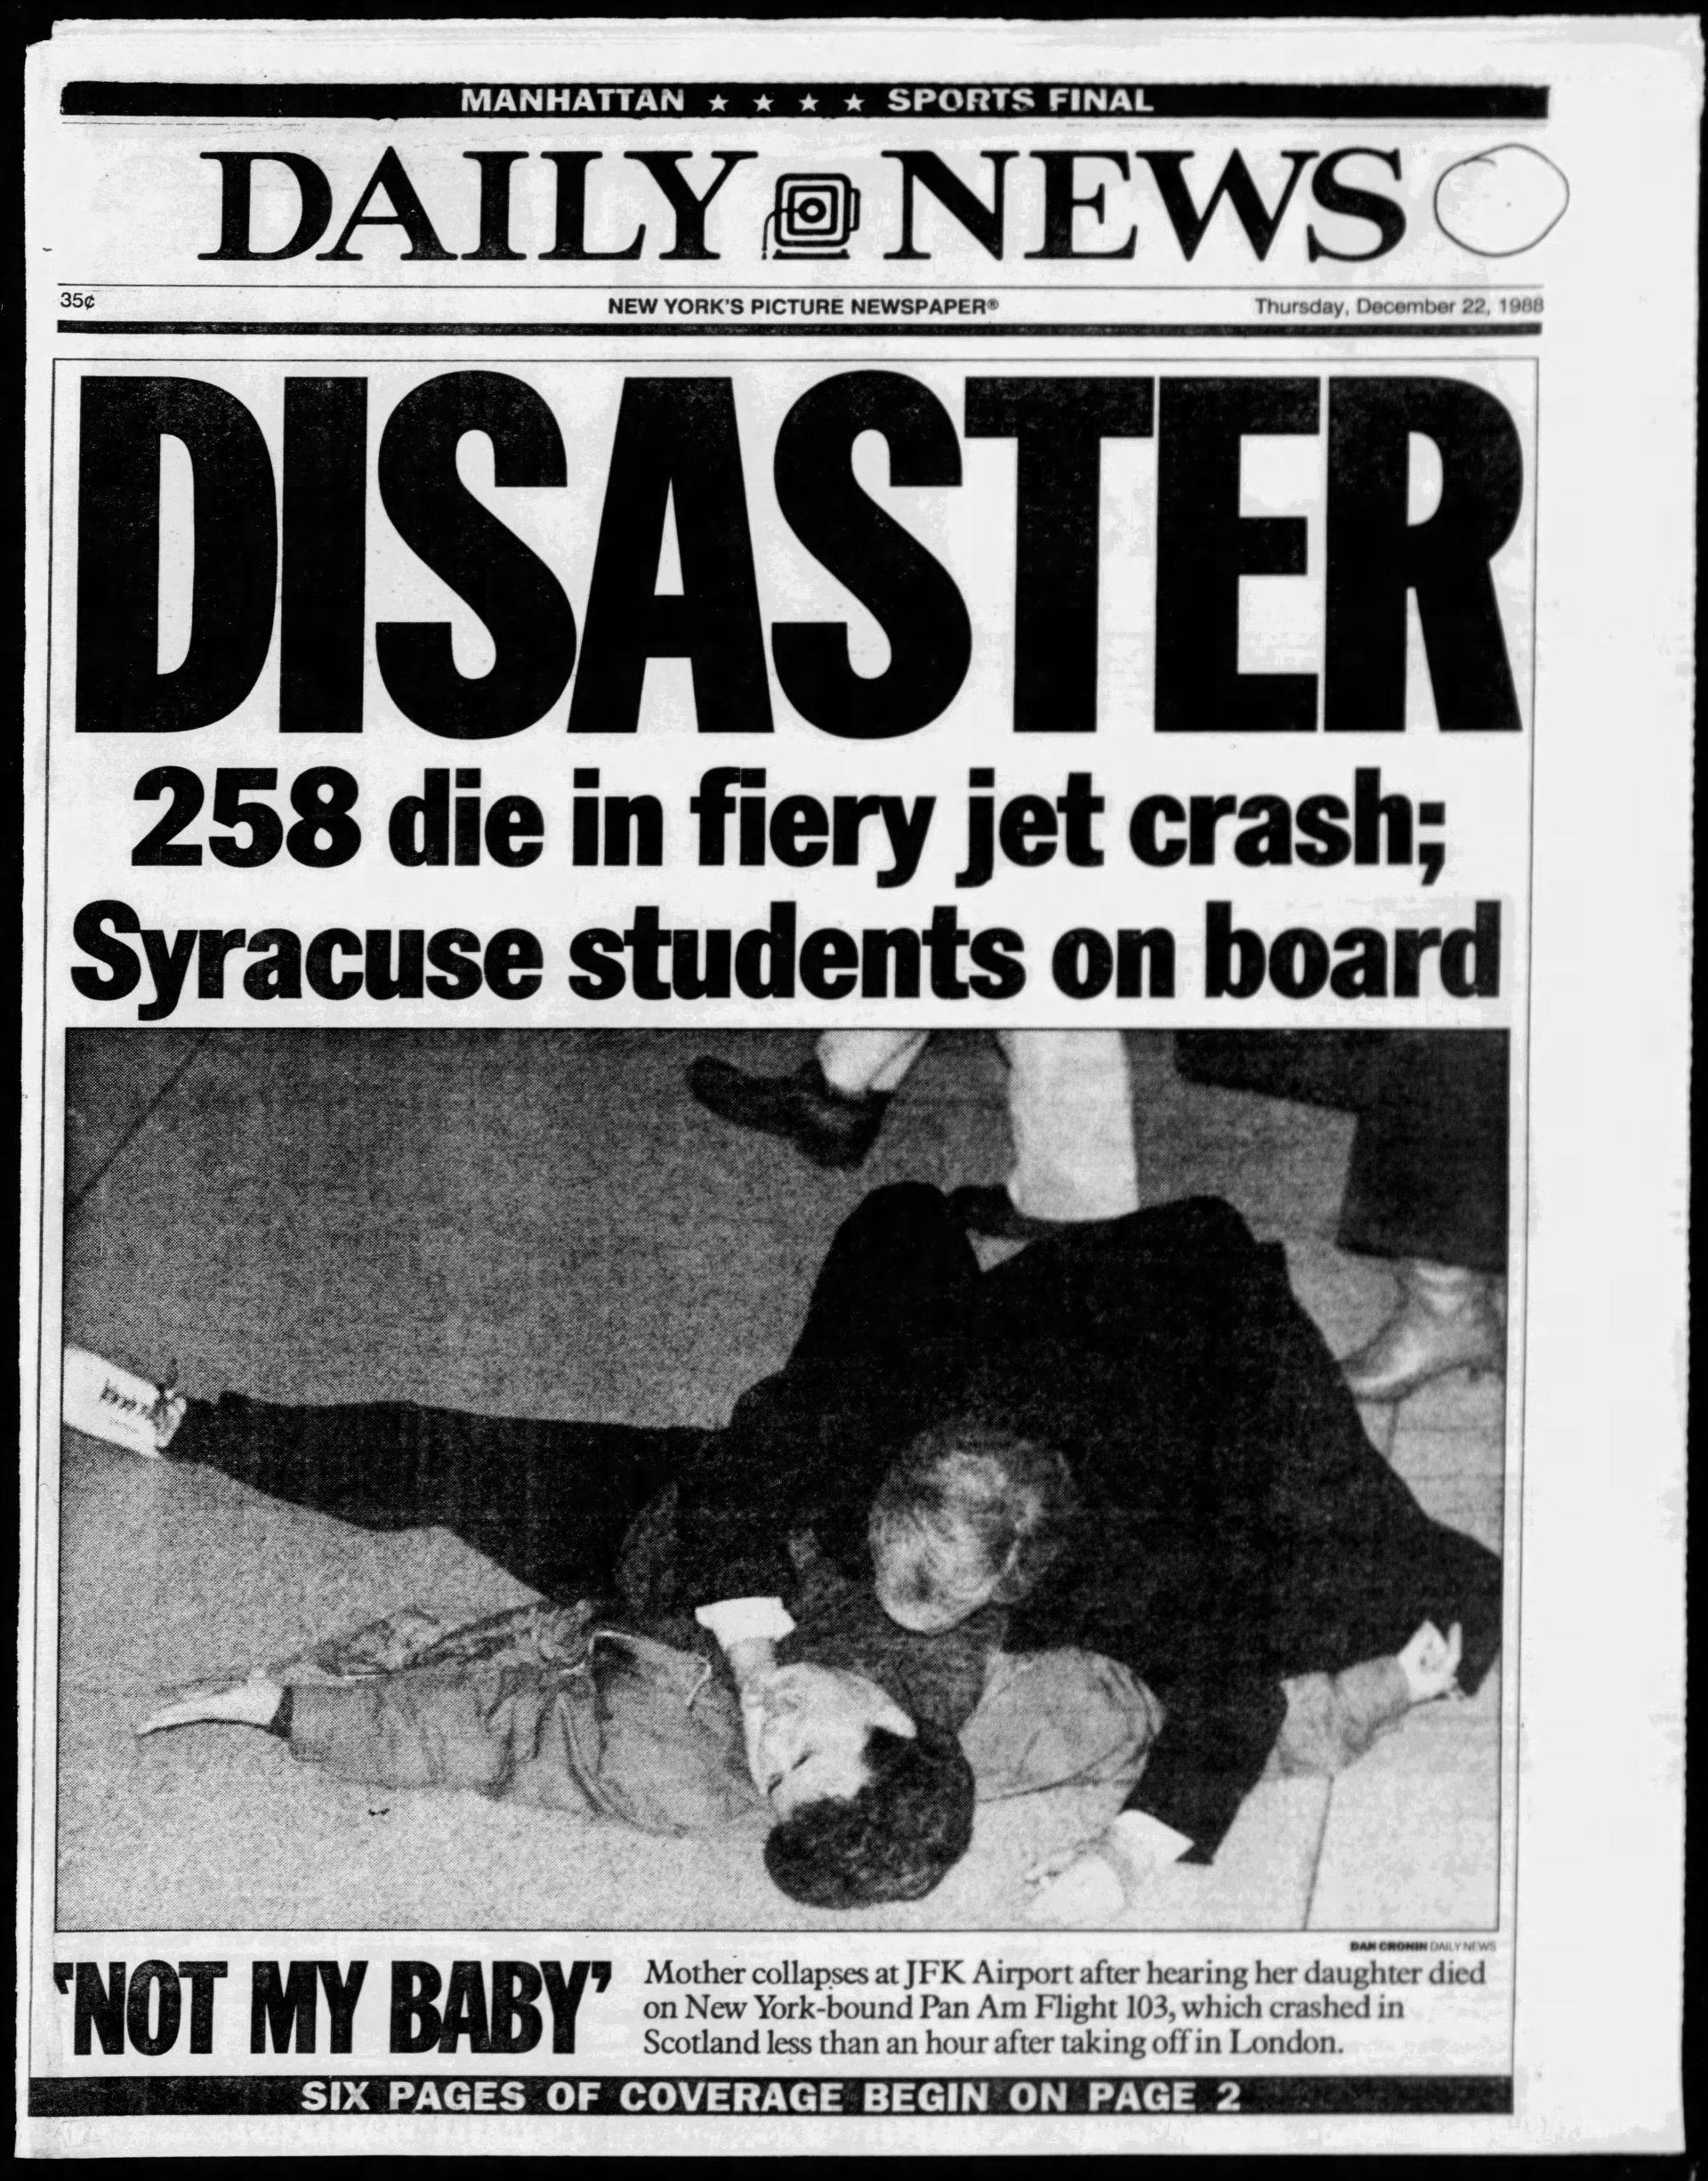 A New York newspaper headline the morning after the 1988 Lockerbie bombing.   